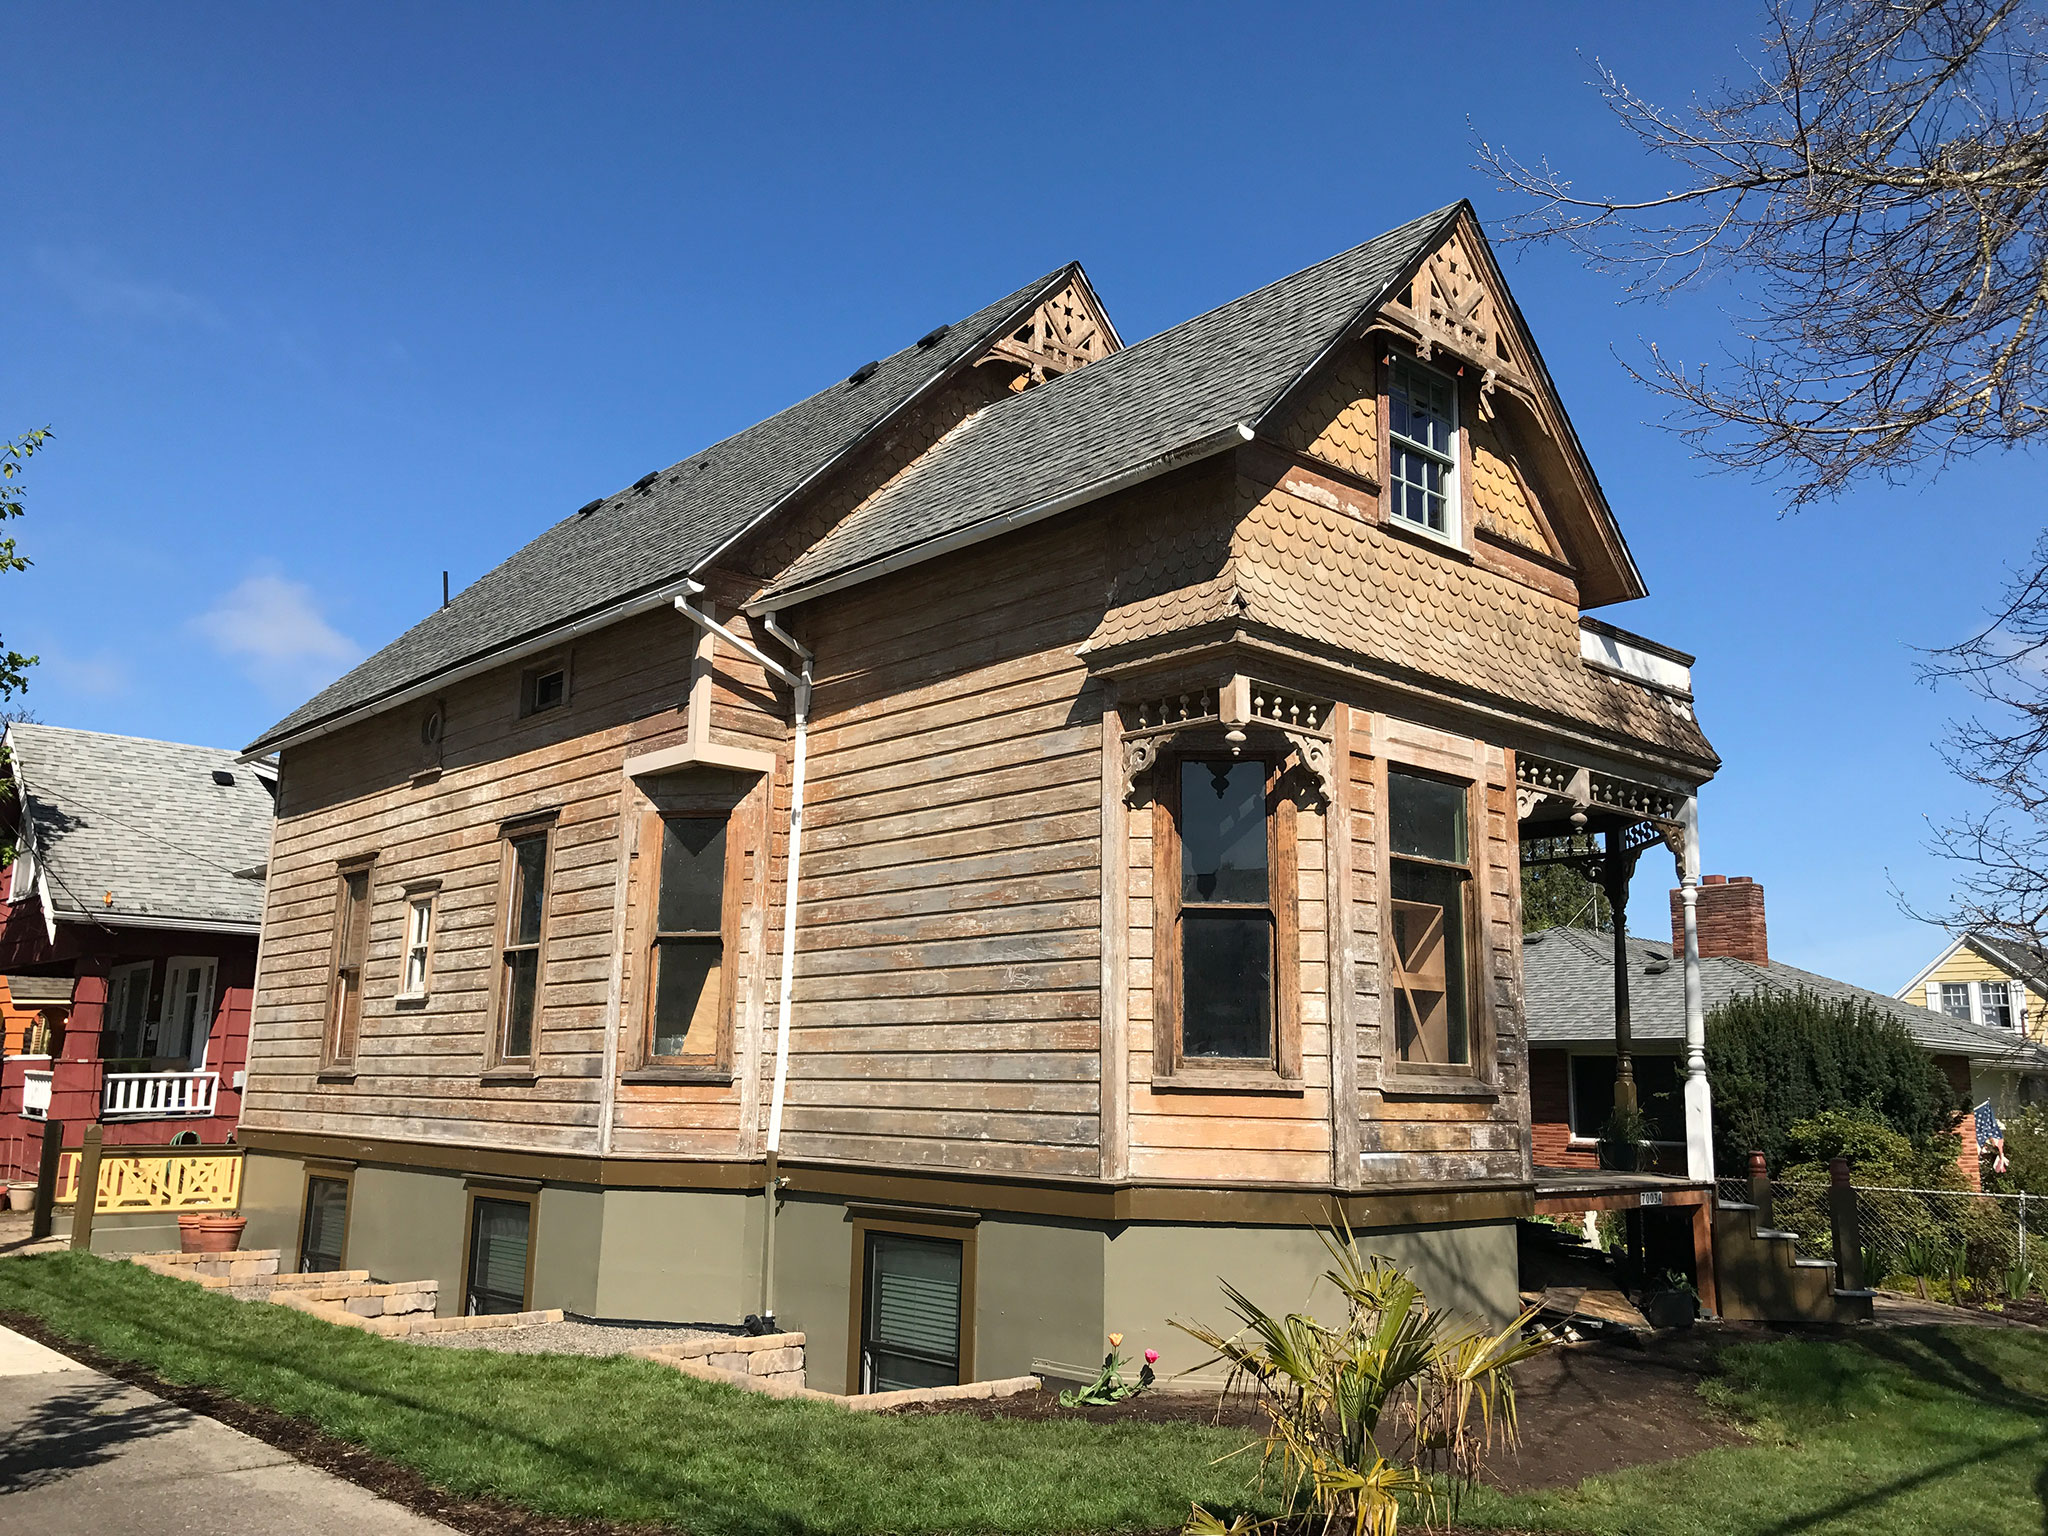 Paint Removal on a Historic Home in SE Portland